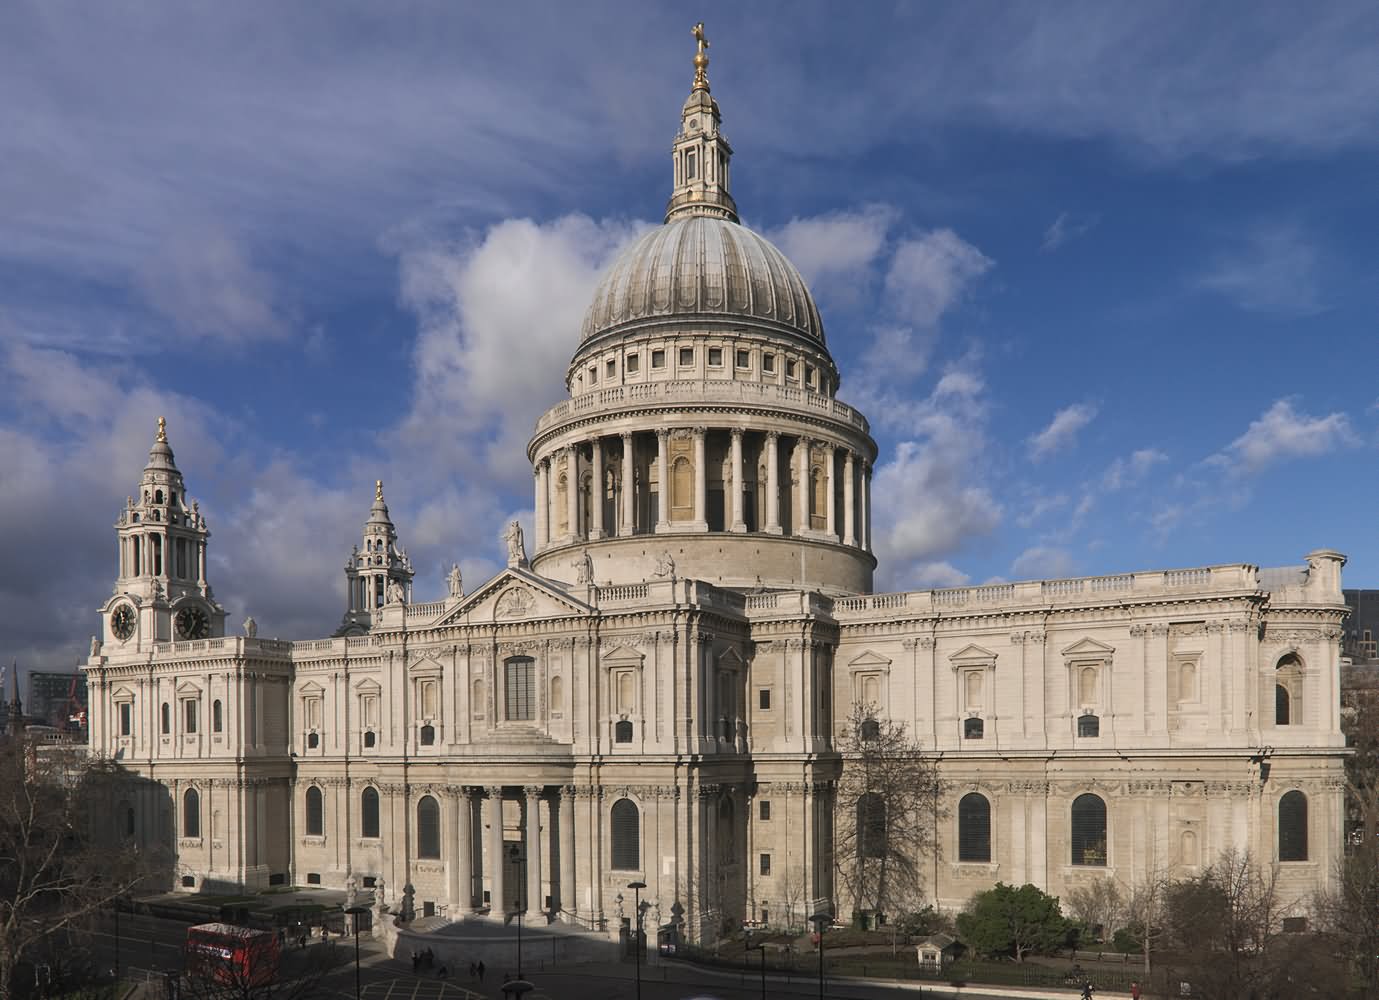 Amazing View Of The St Paul's Cathedral